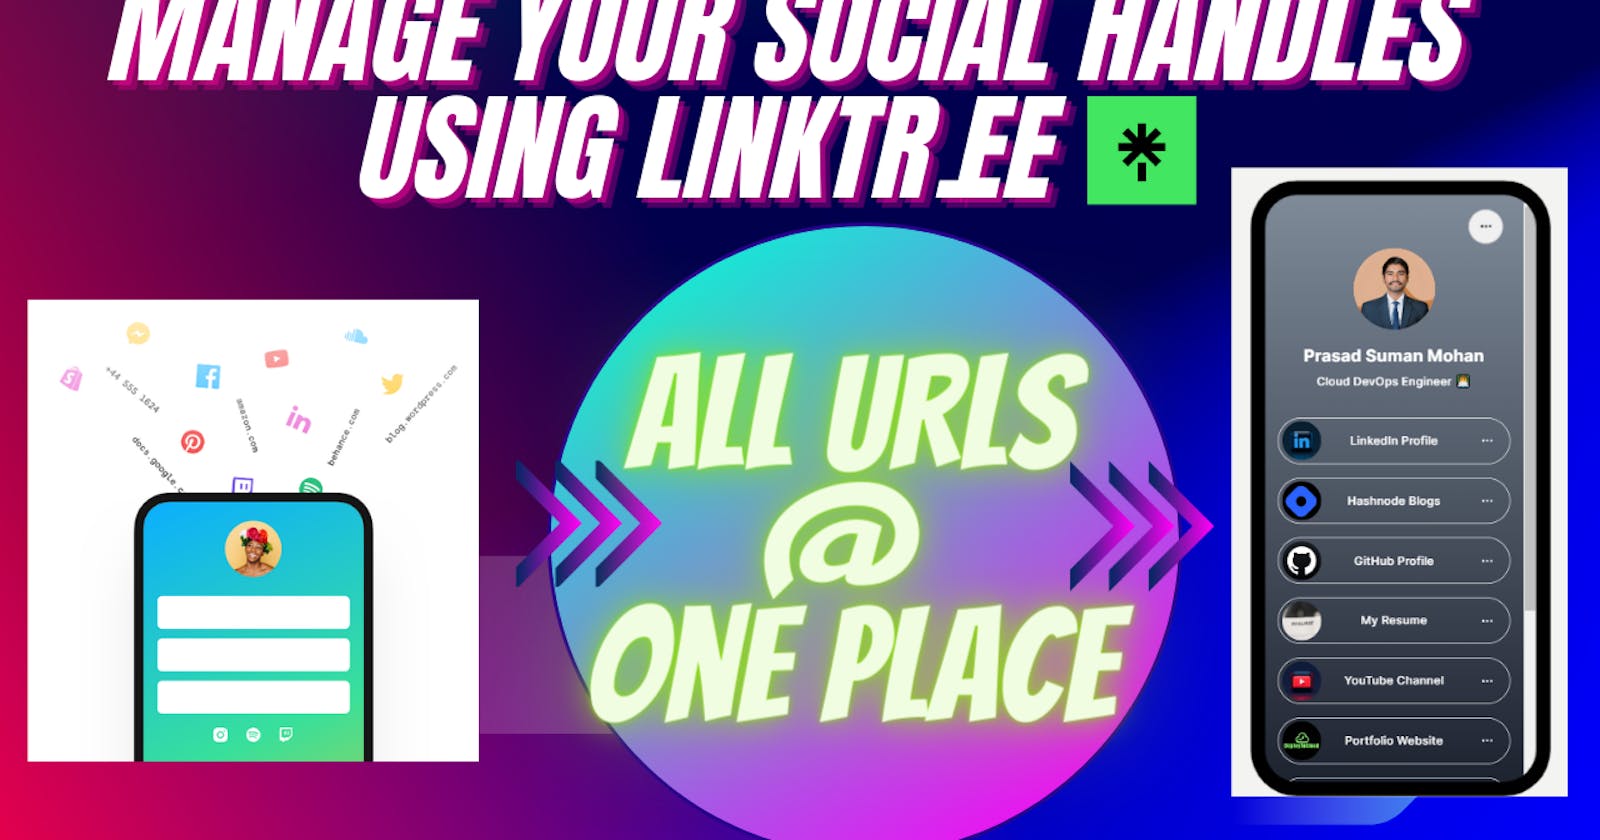 How to manage our Social Handles | Set-up Linktree | Linktree Beginner Tutorial 💥